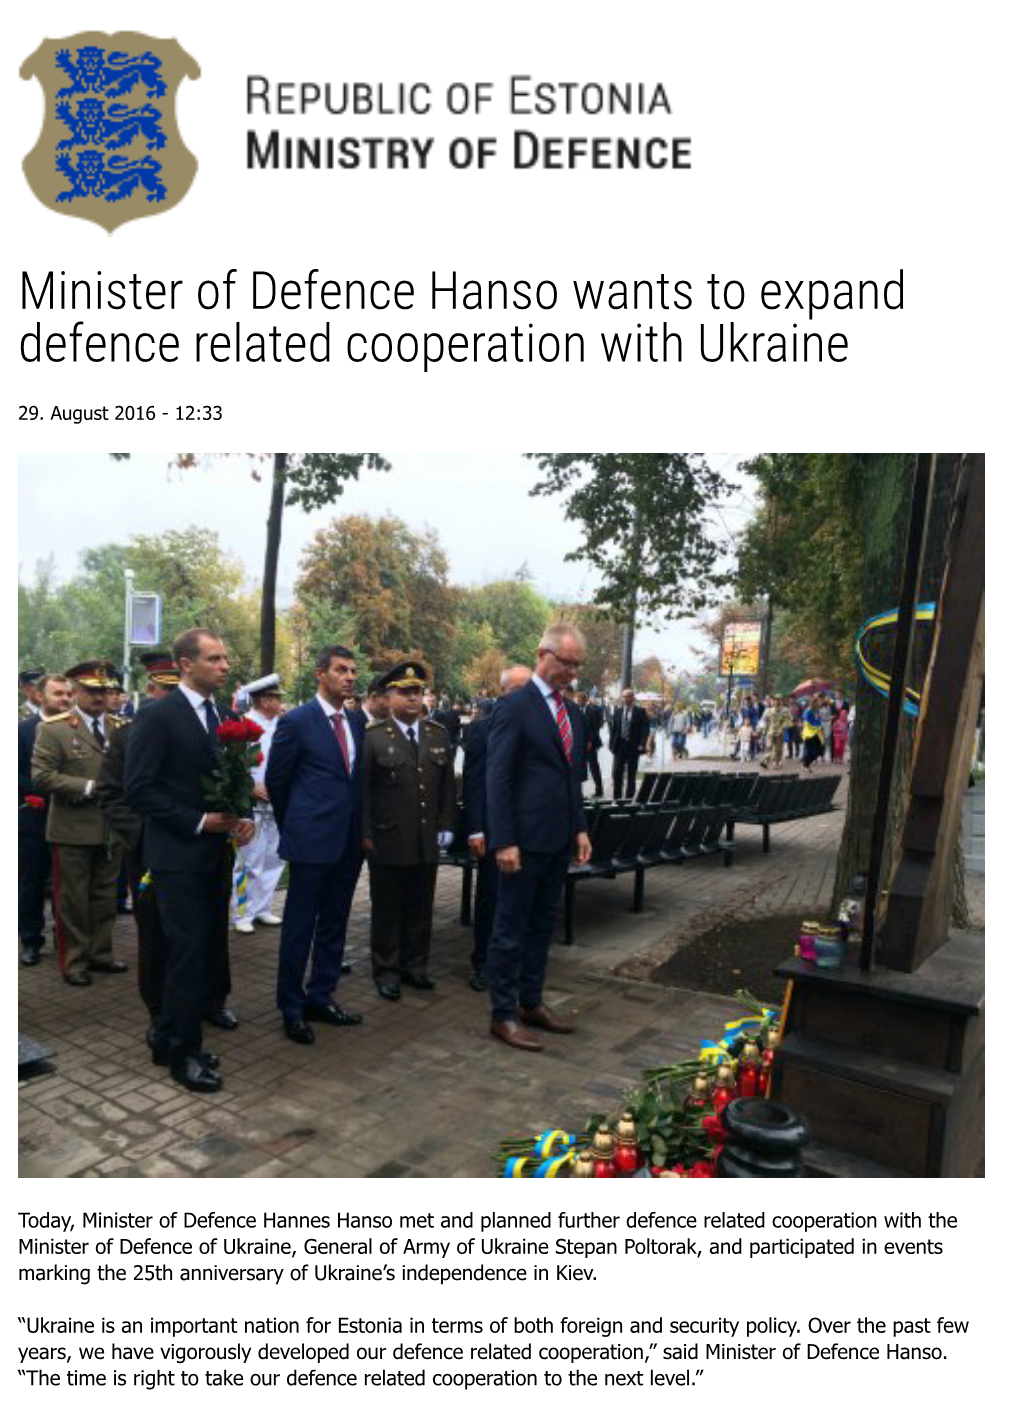 Minister of Defence Hanso Wants to Expand Defence Related Cooperation with Ukraine